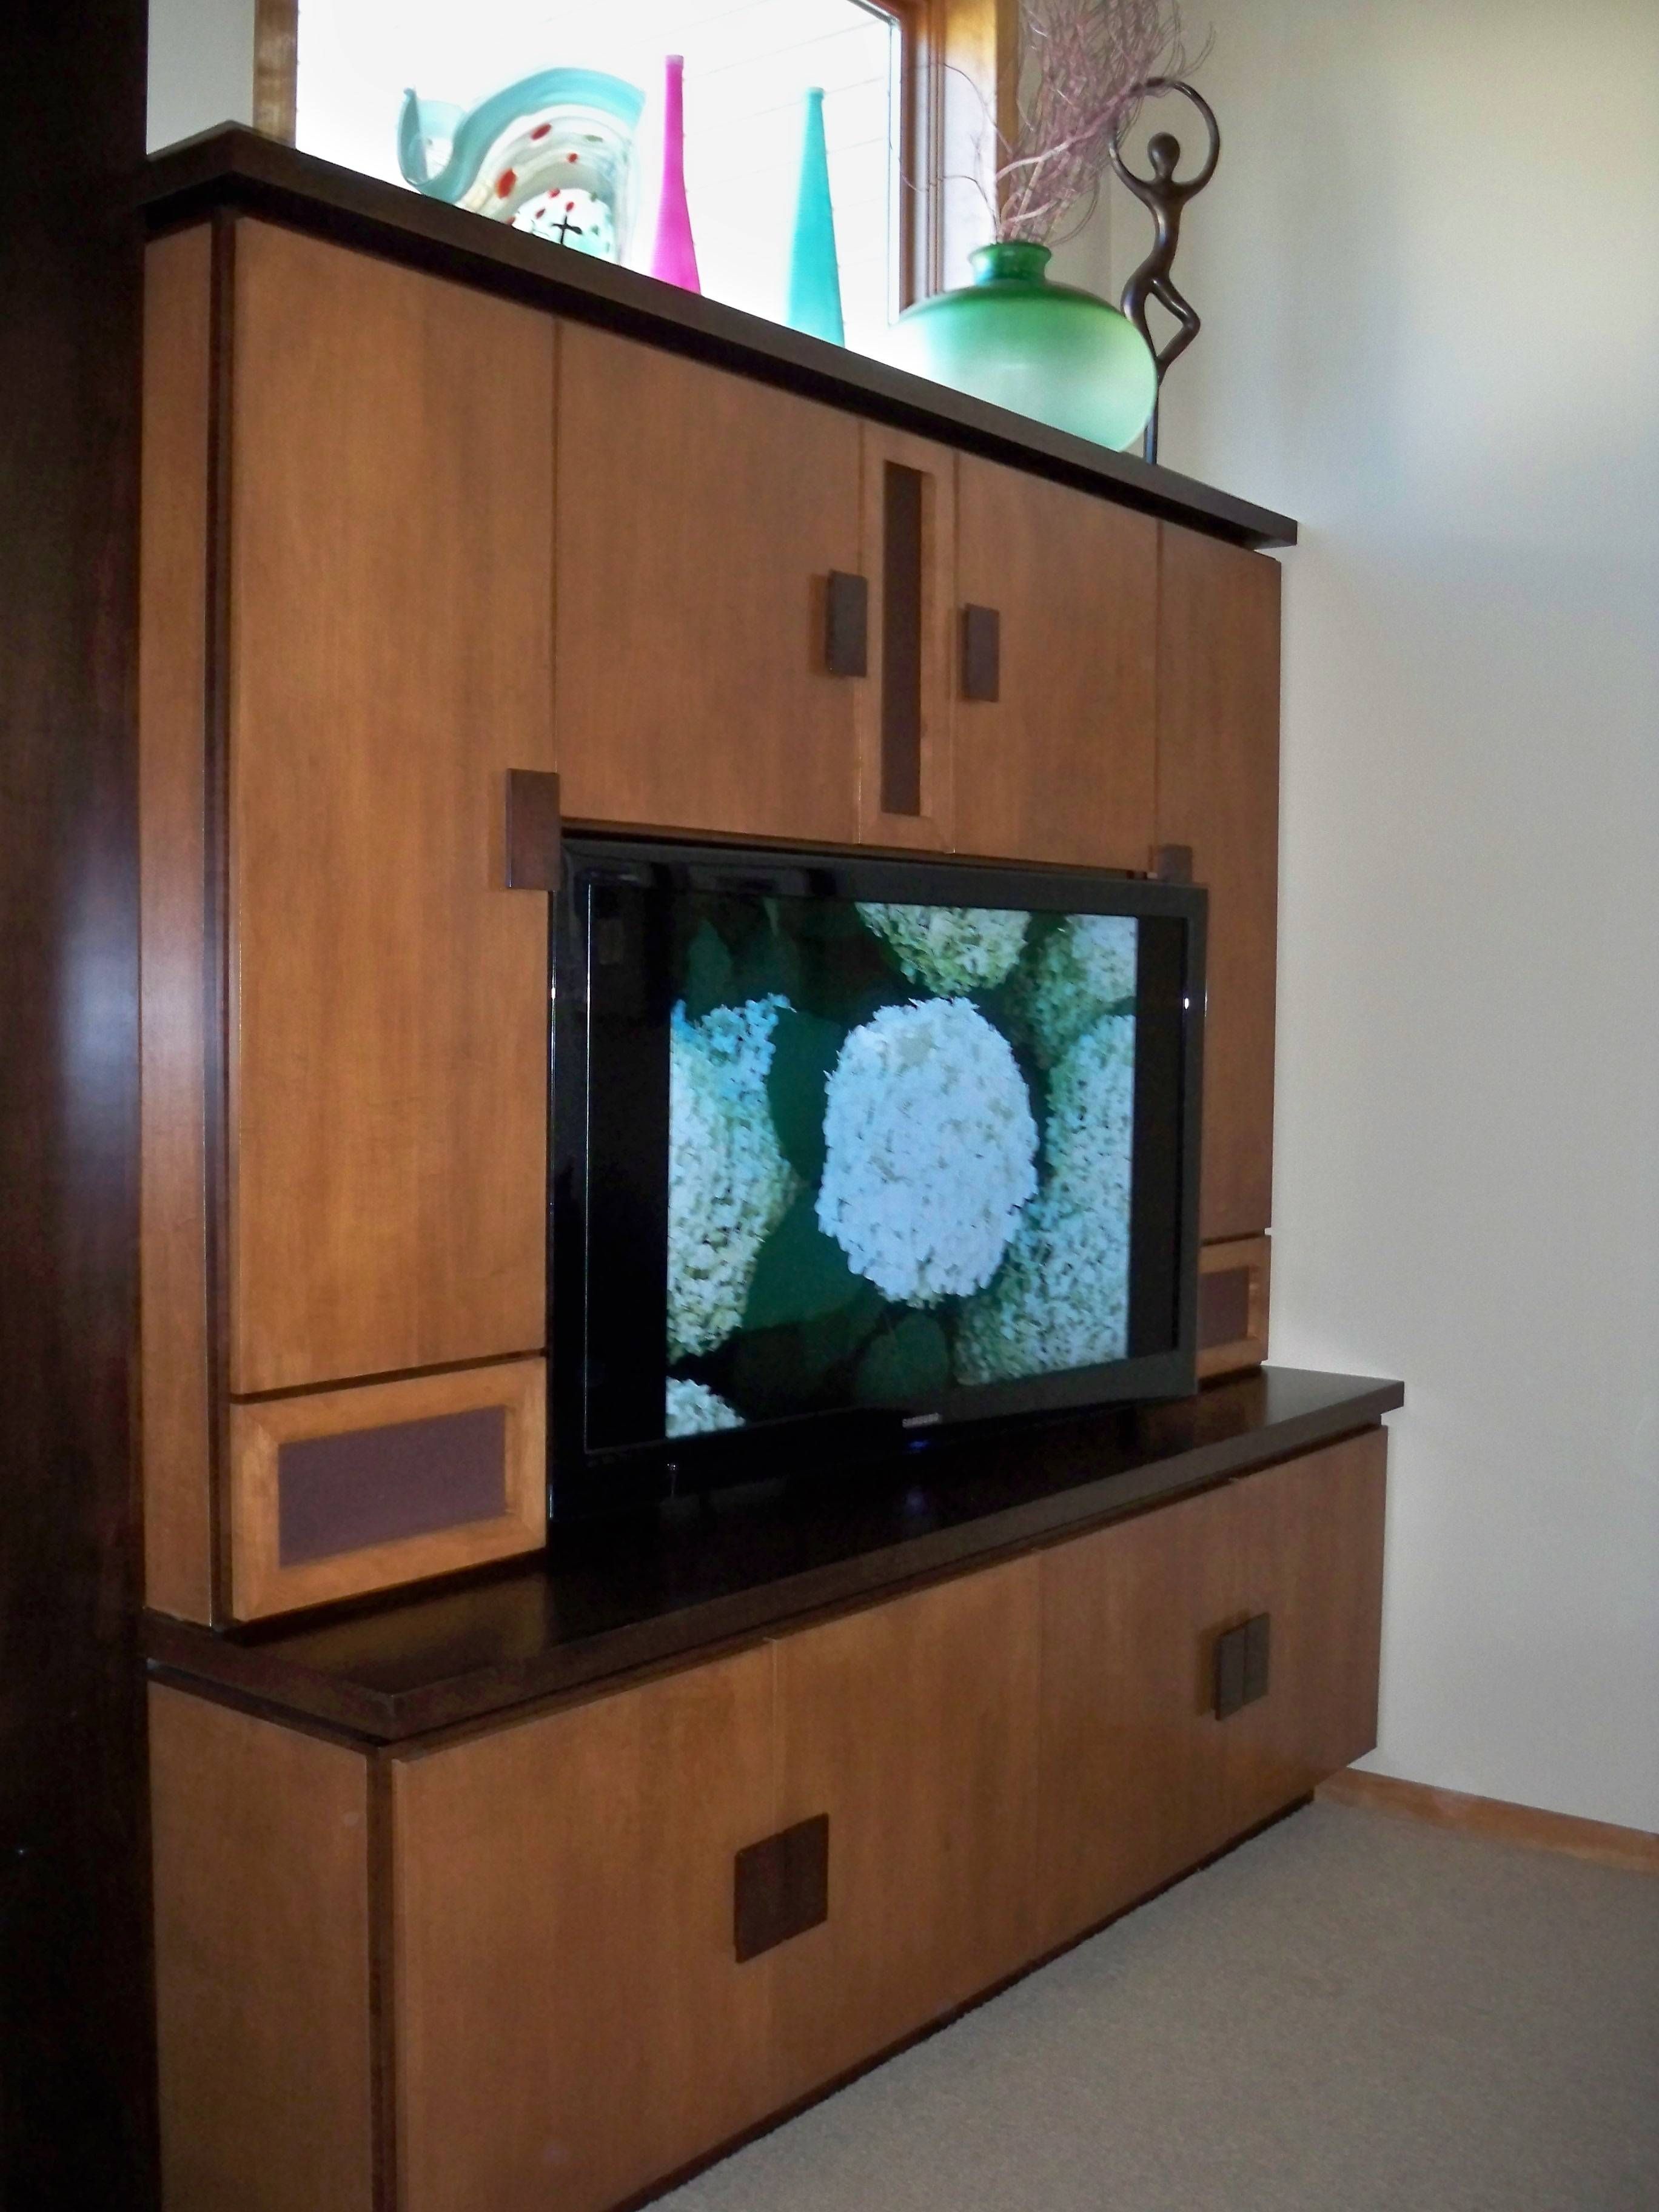 Cabinet : Bright Tv Component Shelves Canada Best Floating Tv With Regard To Unusual Tv Cabinets (View 6 of 15)